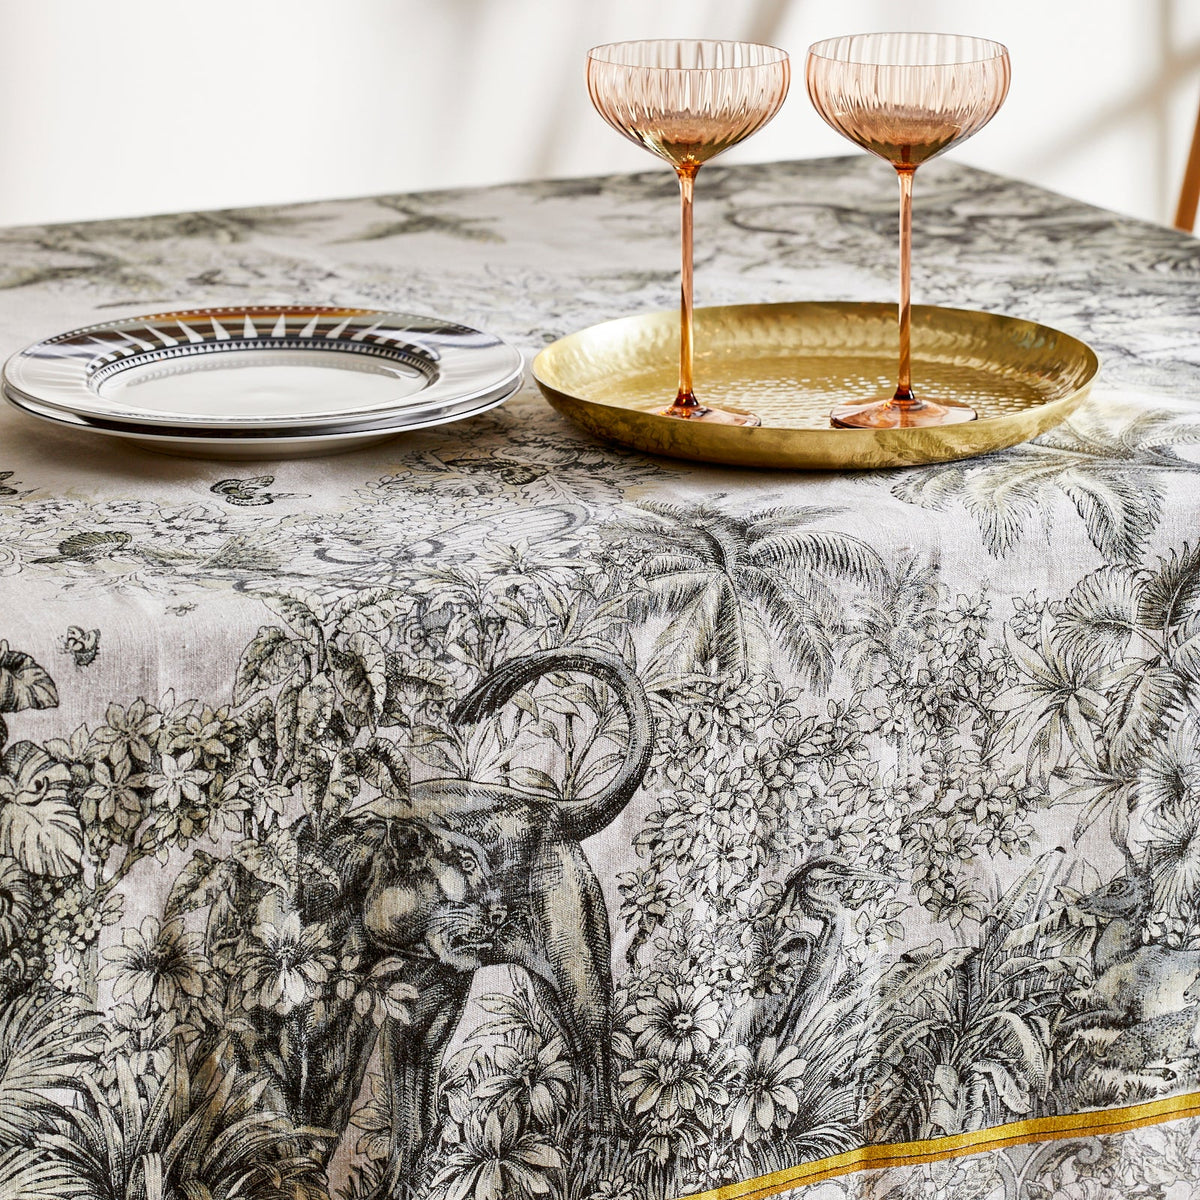 A Morocco Linen Tablecloth adorned with a gold plate, creating a captivating visual feast that transports you to a luxurious Italian mill.